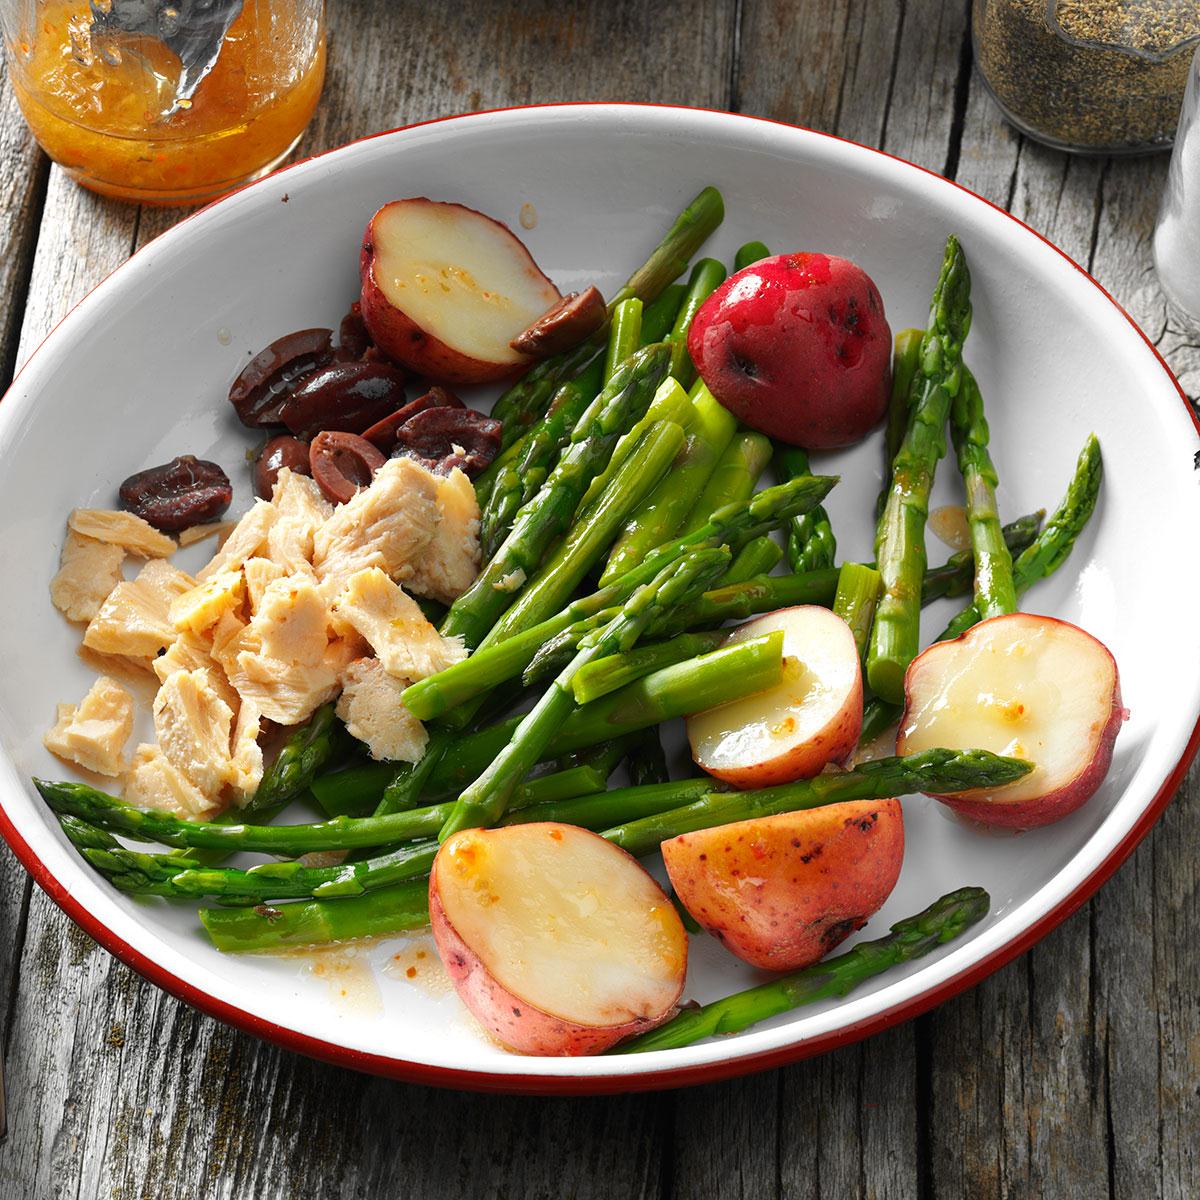 I’ve used this Nicoise as an appetizer or a main-dish salad, and it’s a winner every time I put it on the table. Here’s to a colorful, do-ahead sure thing. —Jan Meyer, St. Paul, Minnesota <a href="https://www.tasteofhome.com/recipes/asparagus-nicoise-salad/">Get Recipe</a>